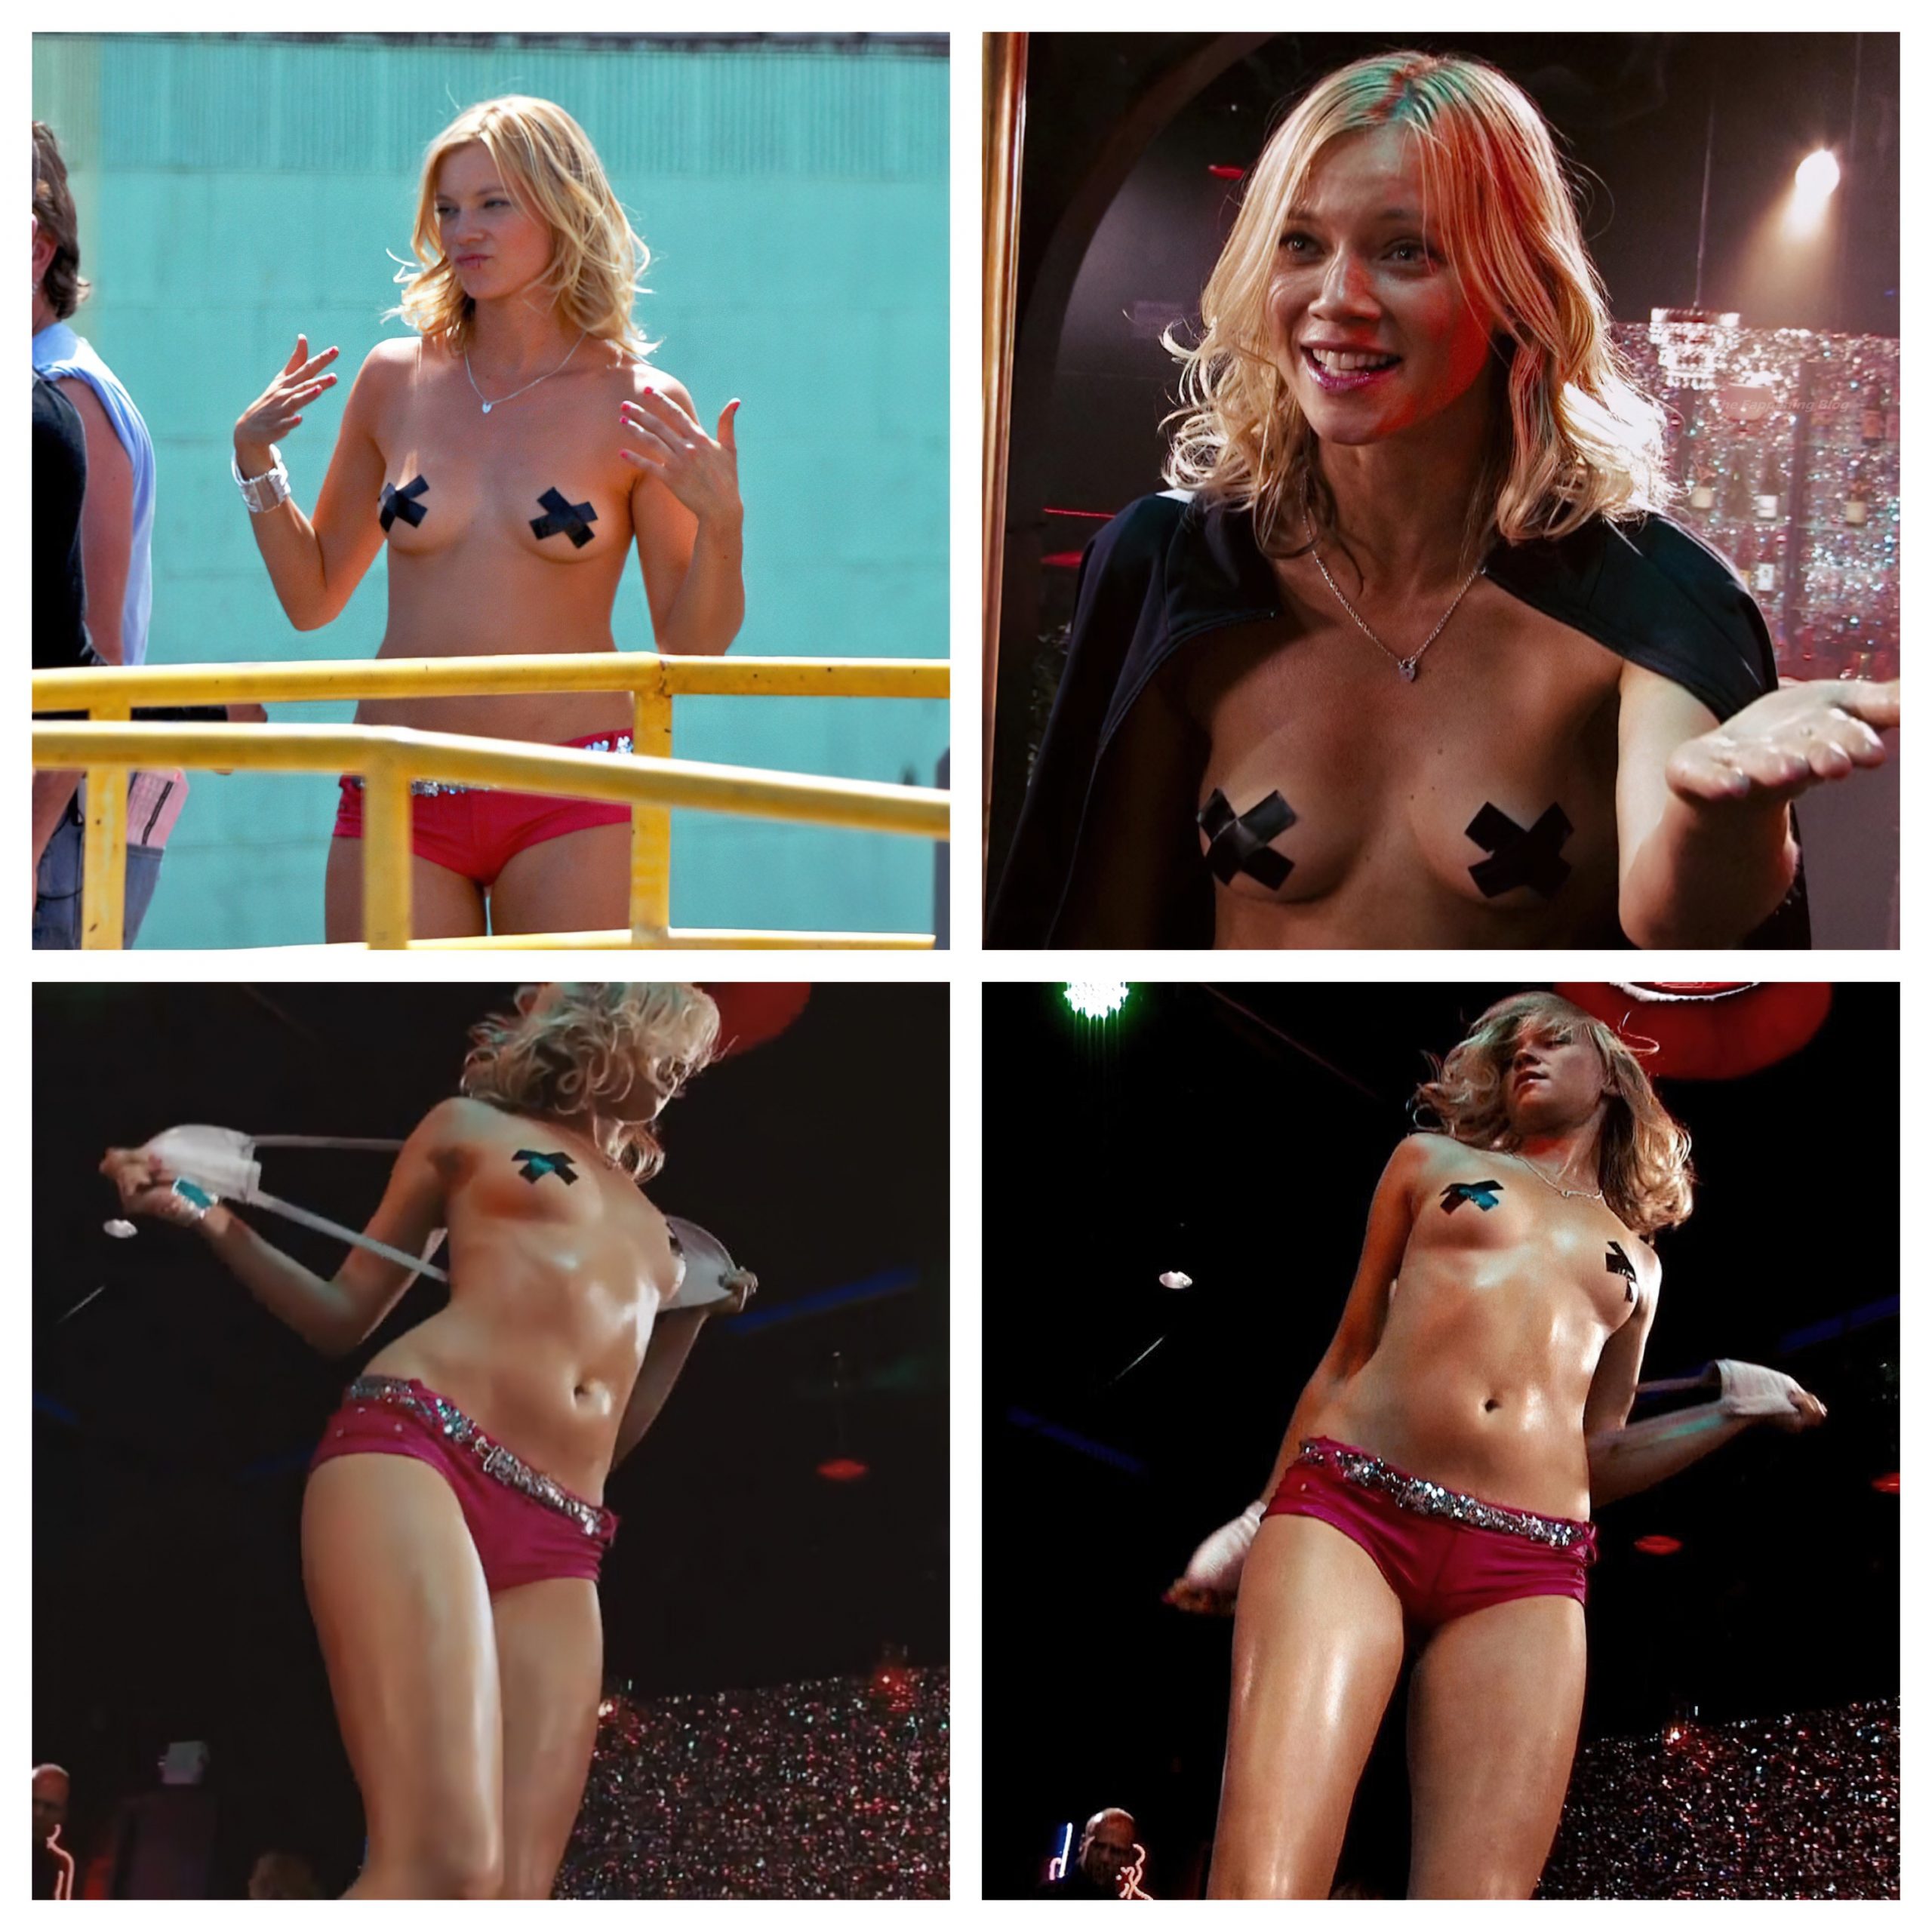 Check out Amy Smart’s collage photo from "Crank 2". The actress c...